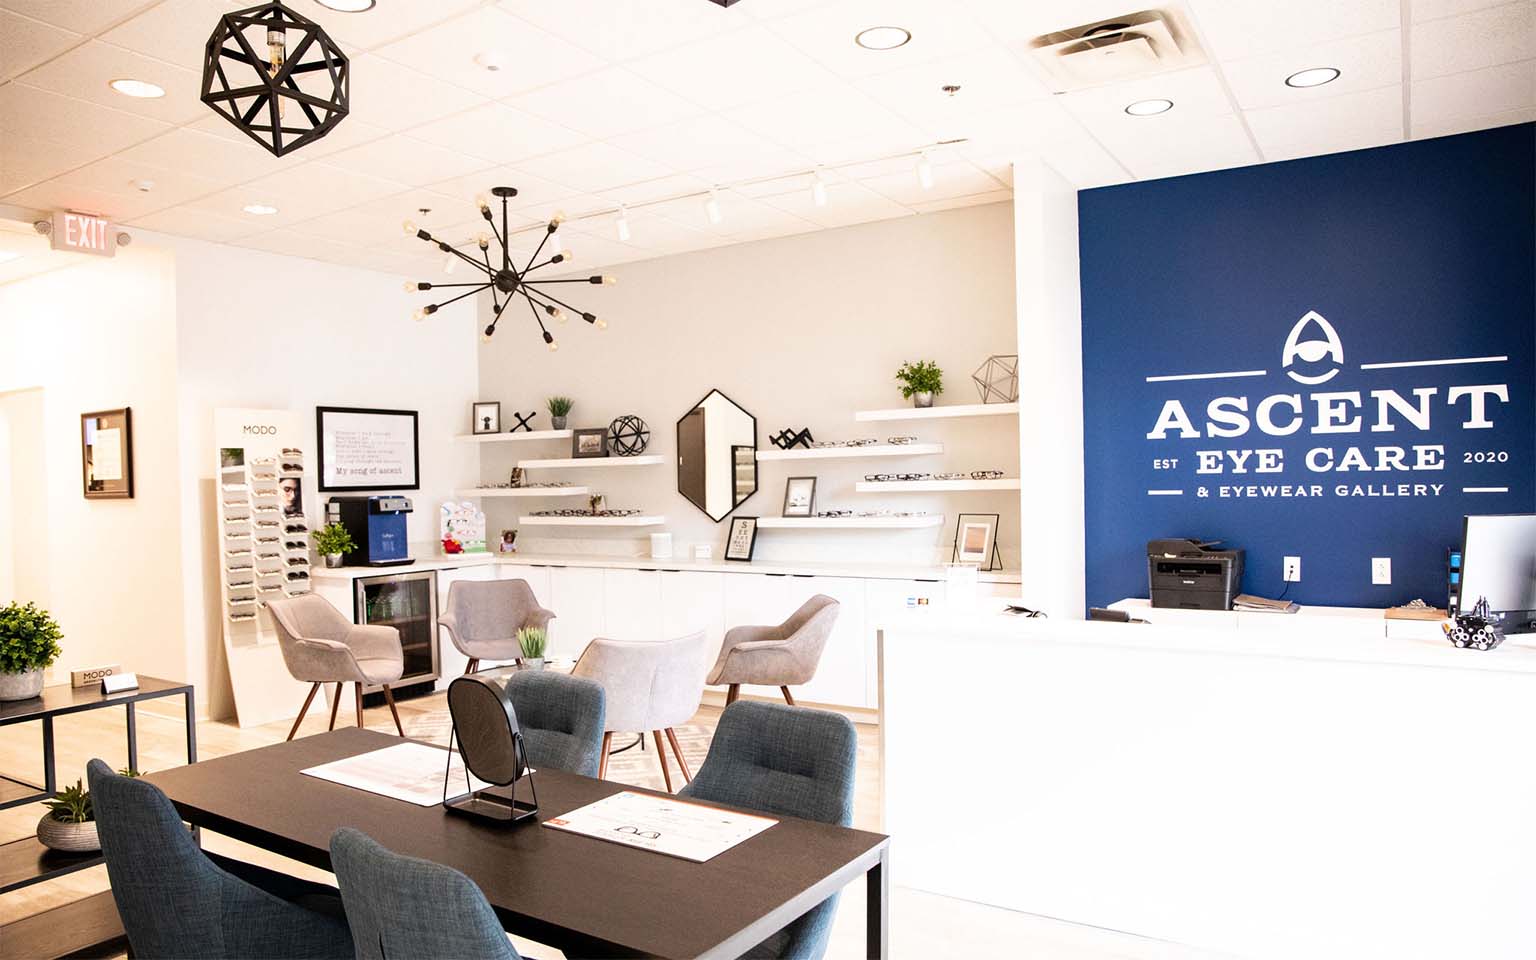 Ascent Eye Care 